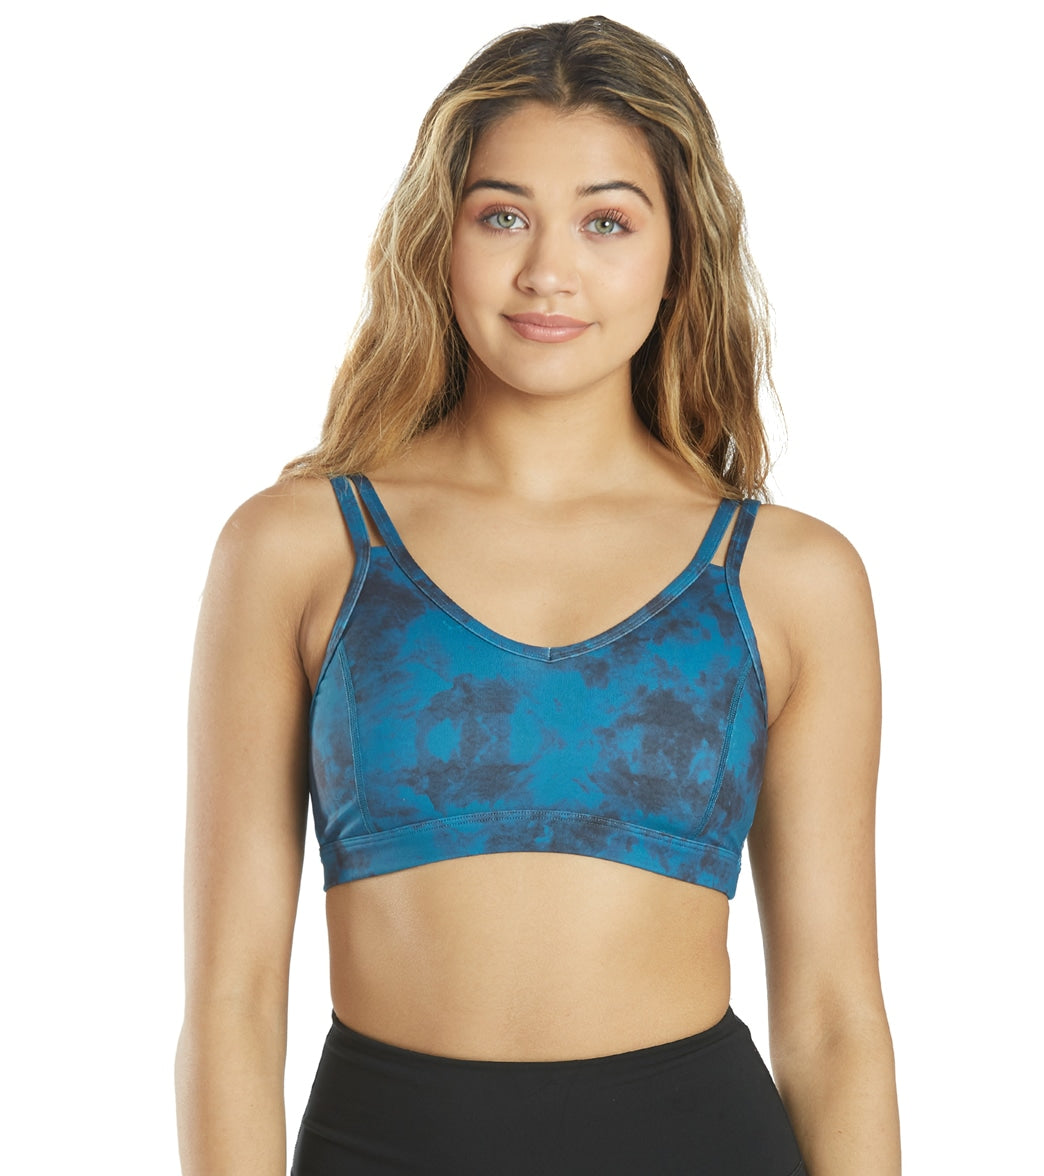 Everyday Yoga Delight Solid Racer Back Sports Bra at YogaOutlet